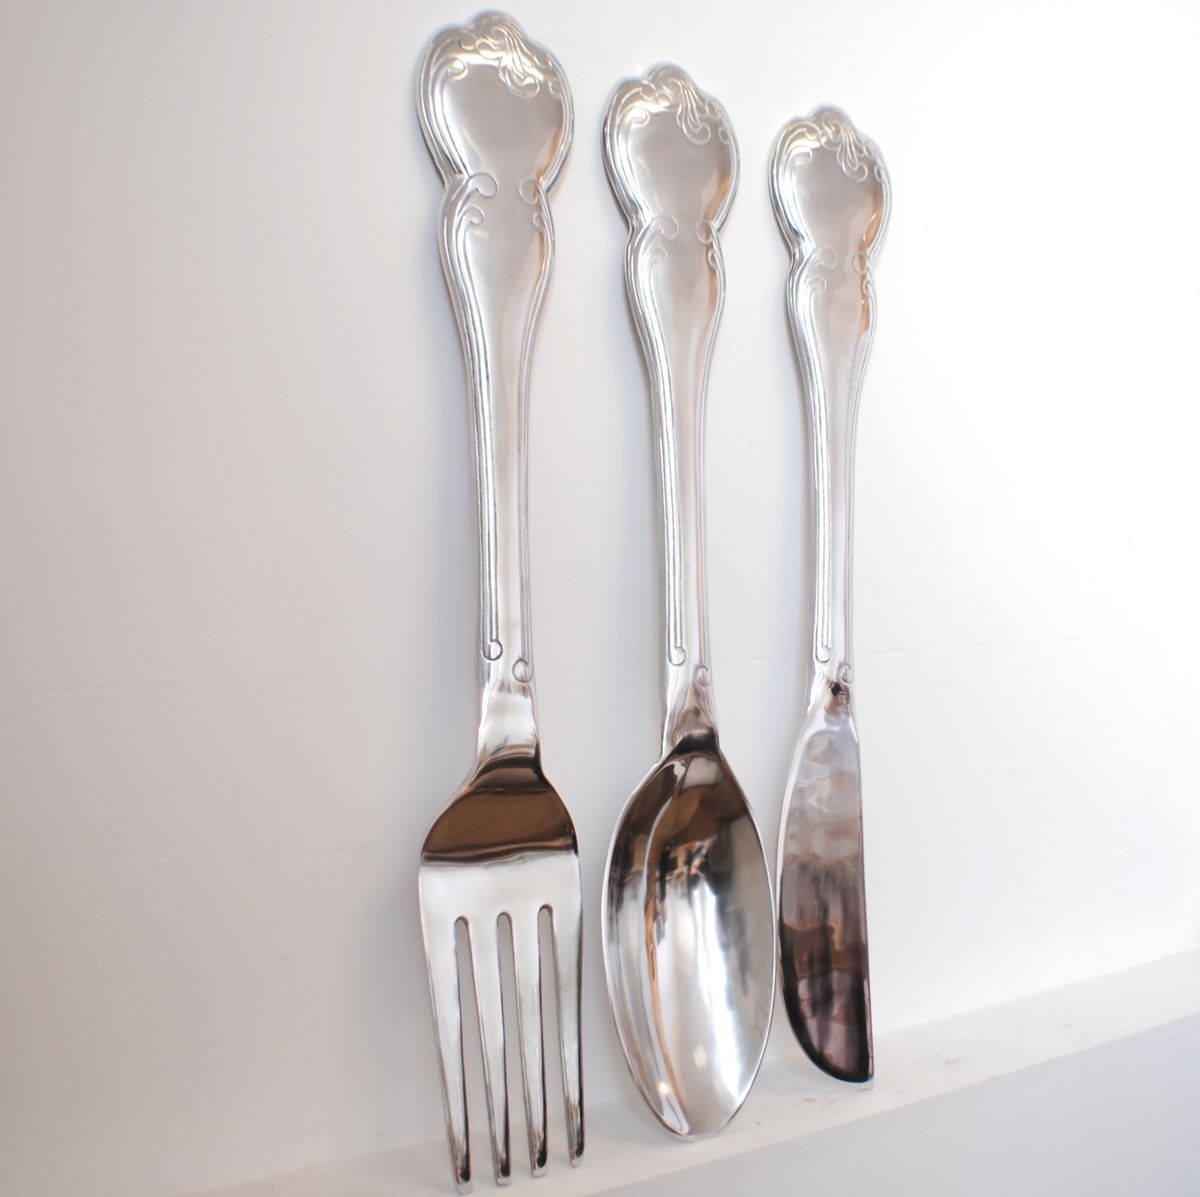 Utensil Wall Art With Favorite Large Kitchen Utensil Wall Decor • Walls Decor (View 6 of 15)